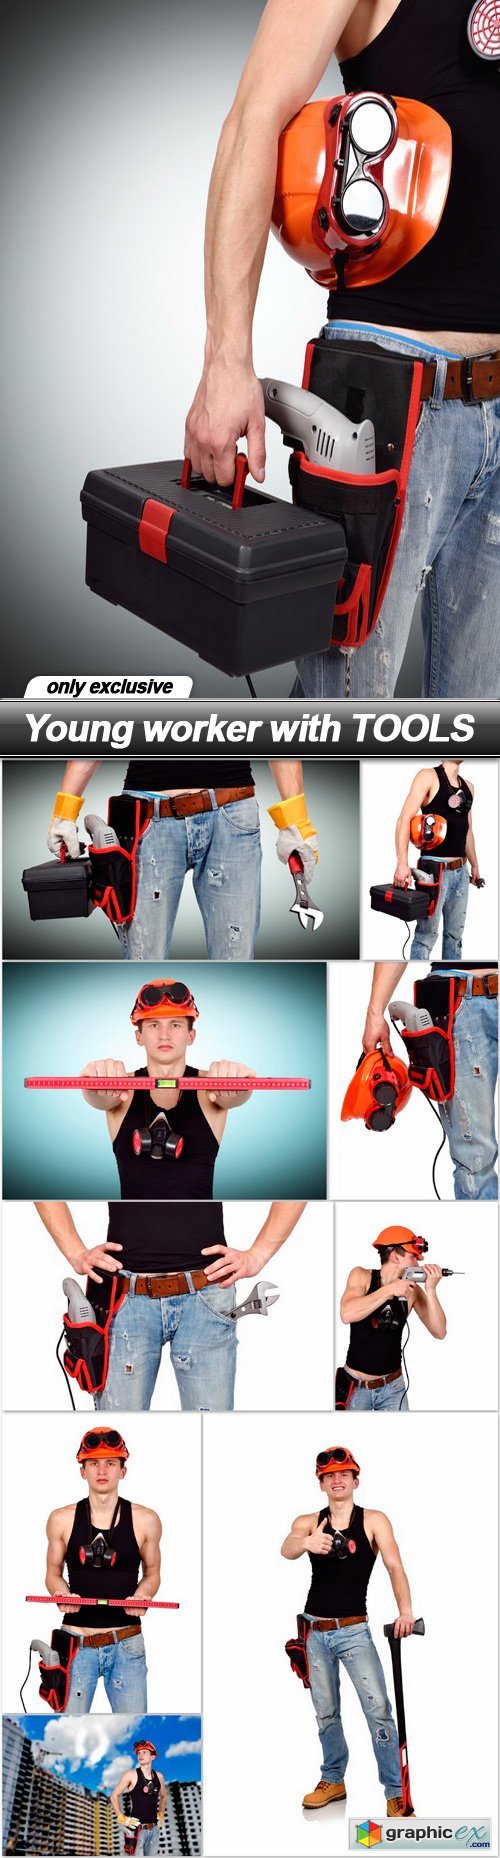 Young worker with TOOLS - 10 UHQ JPEG